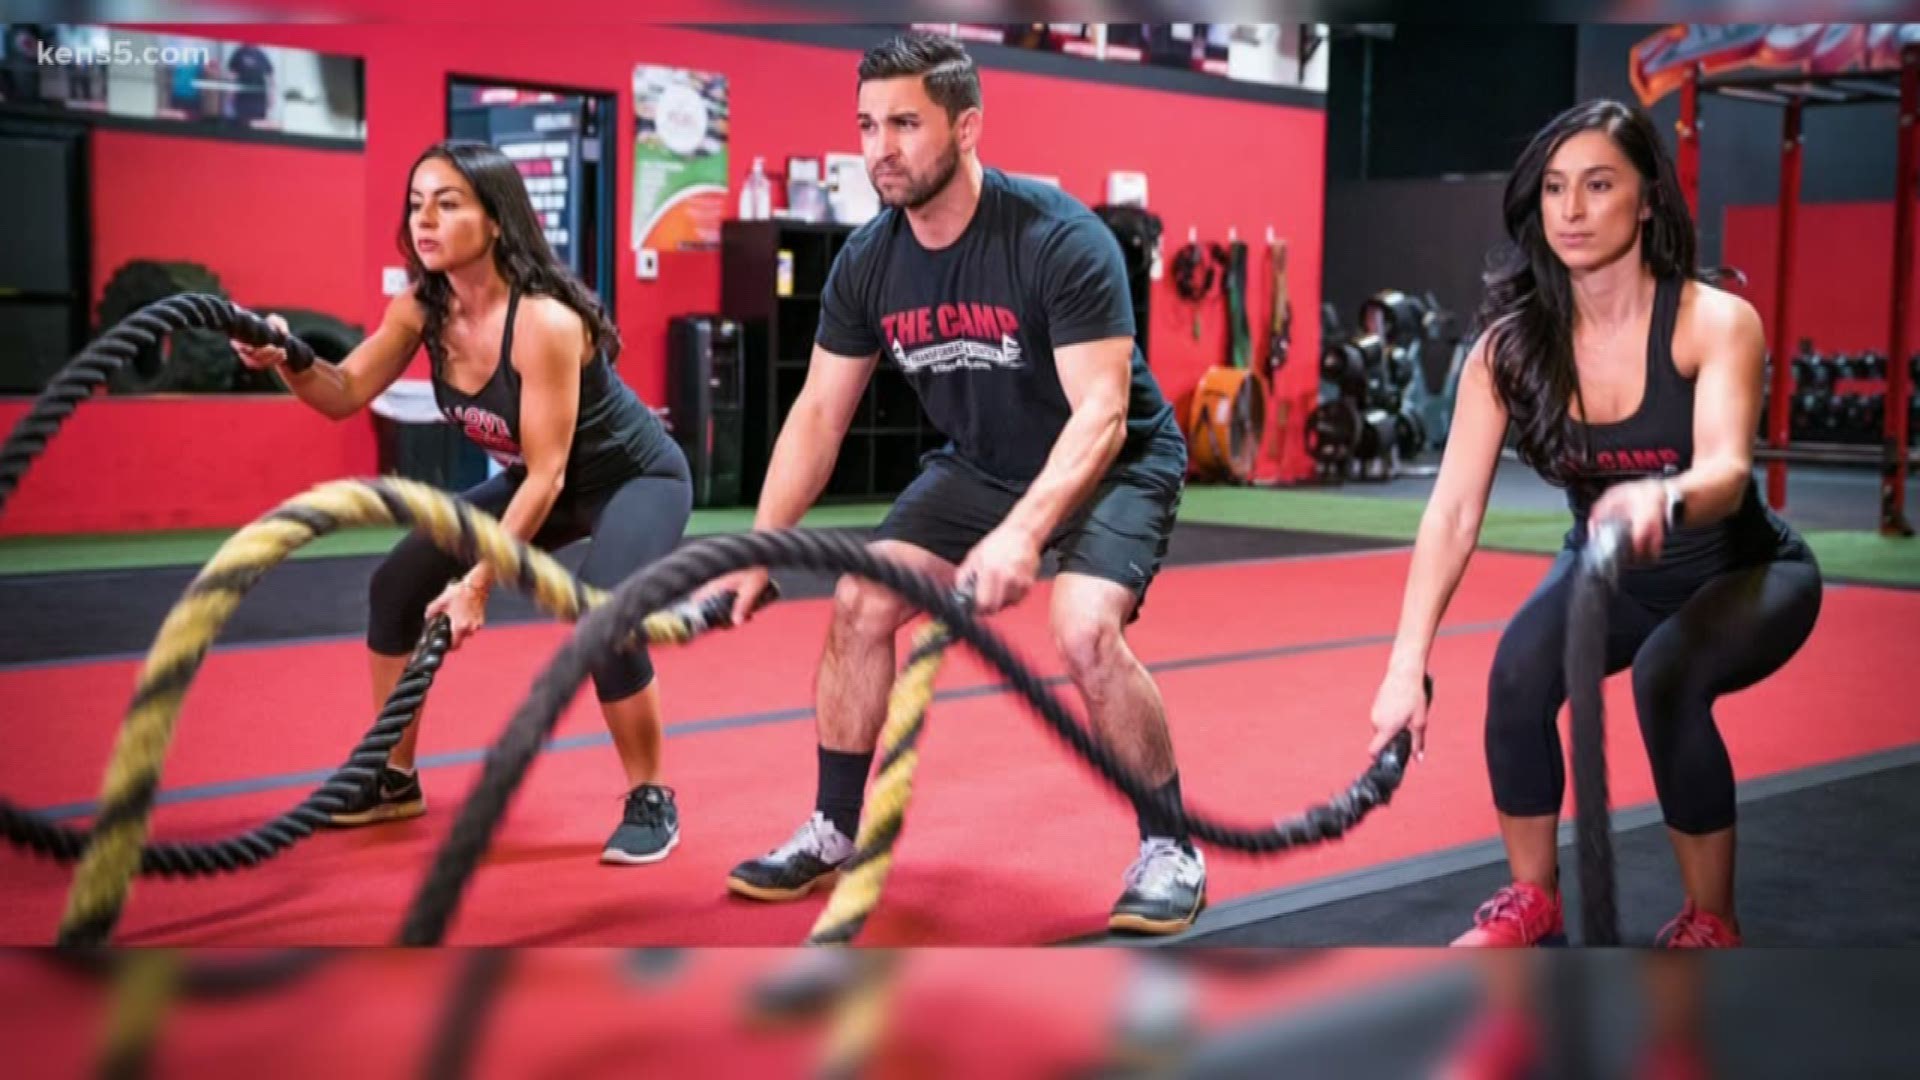 Fitness experts from Camp Transformation bust some common fitness myths and offer some simple exercises with a fitness band that can be done at home or anywhere.